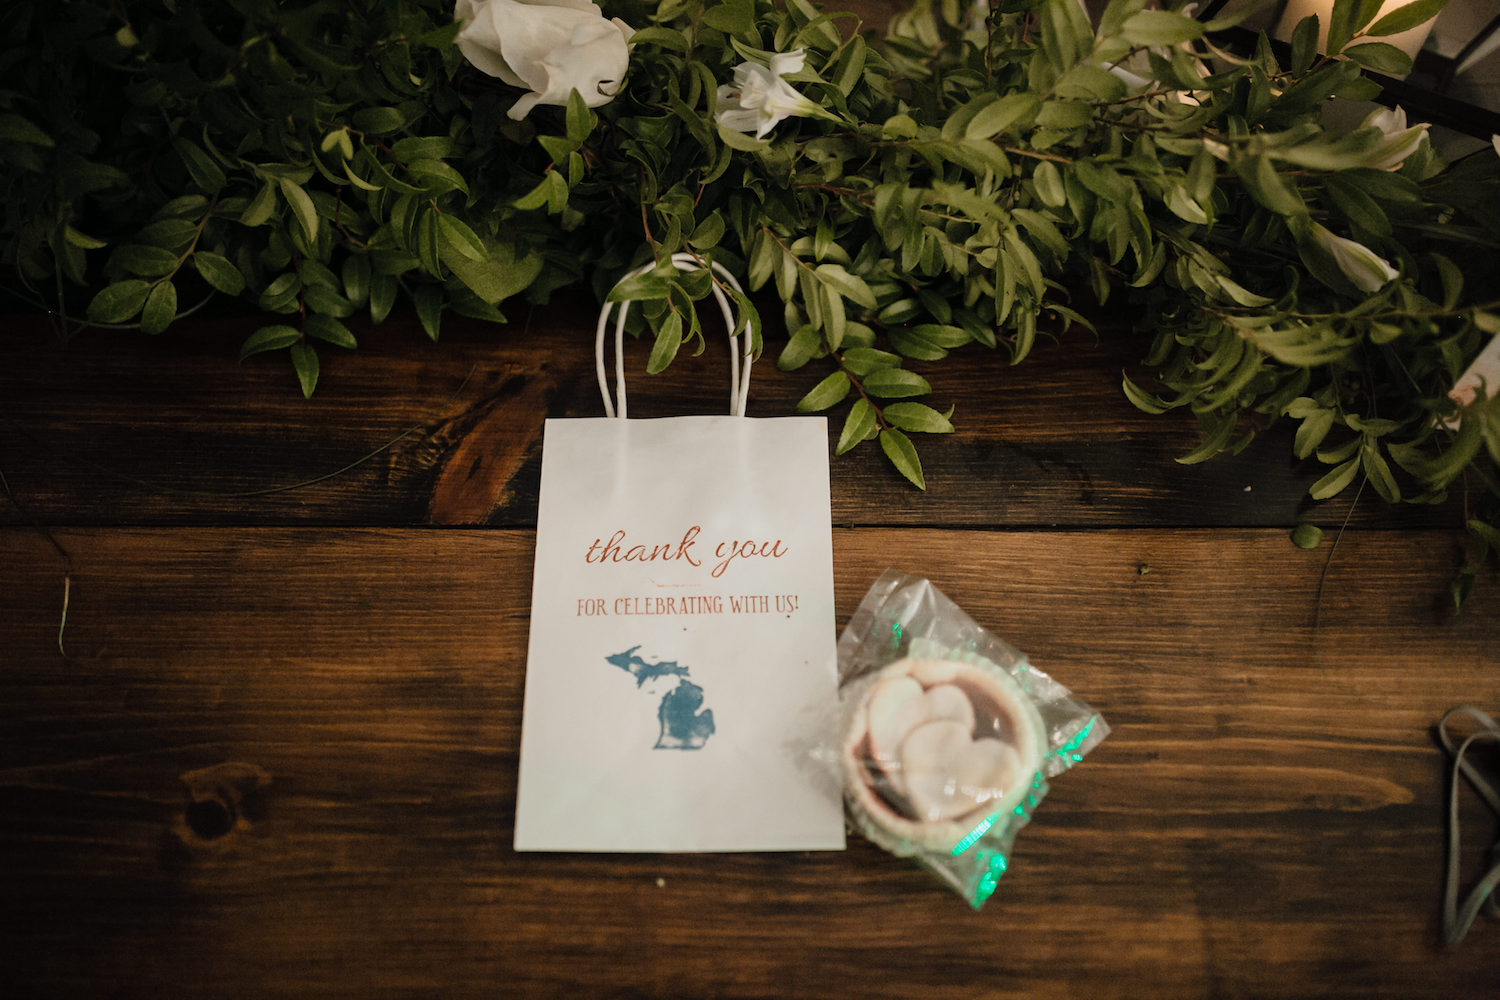 Thank you bags for guest of Aurora cellars wedding